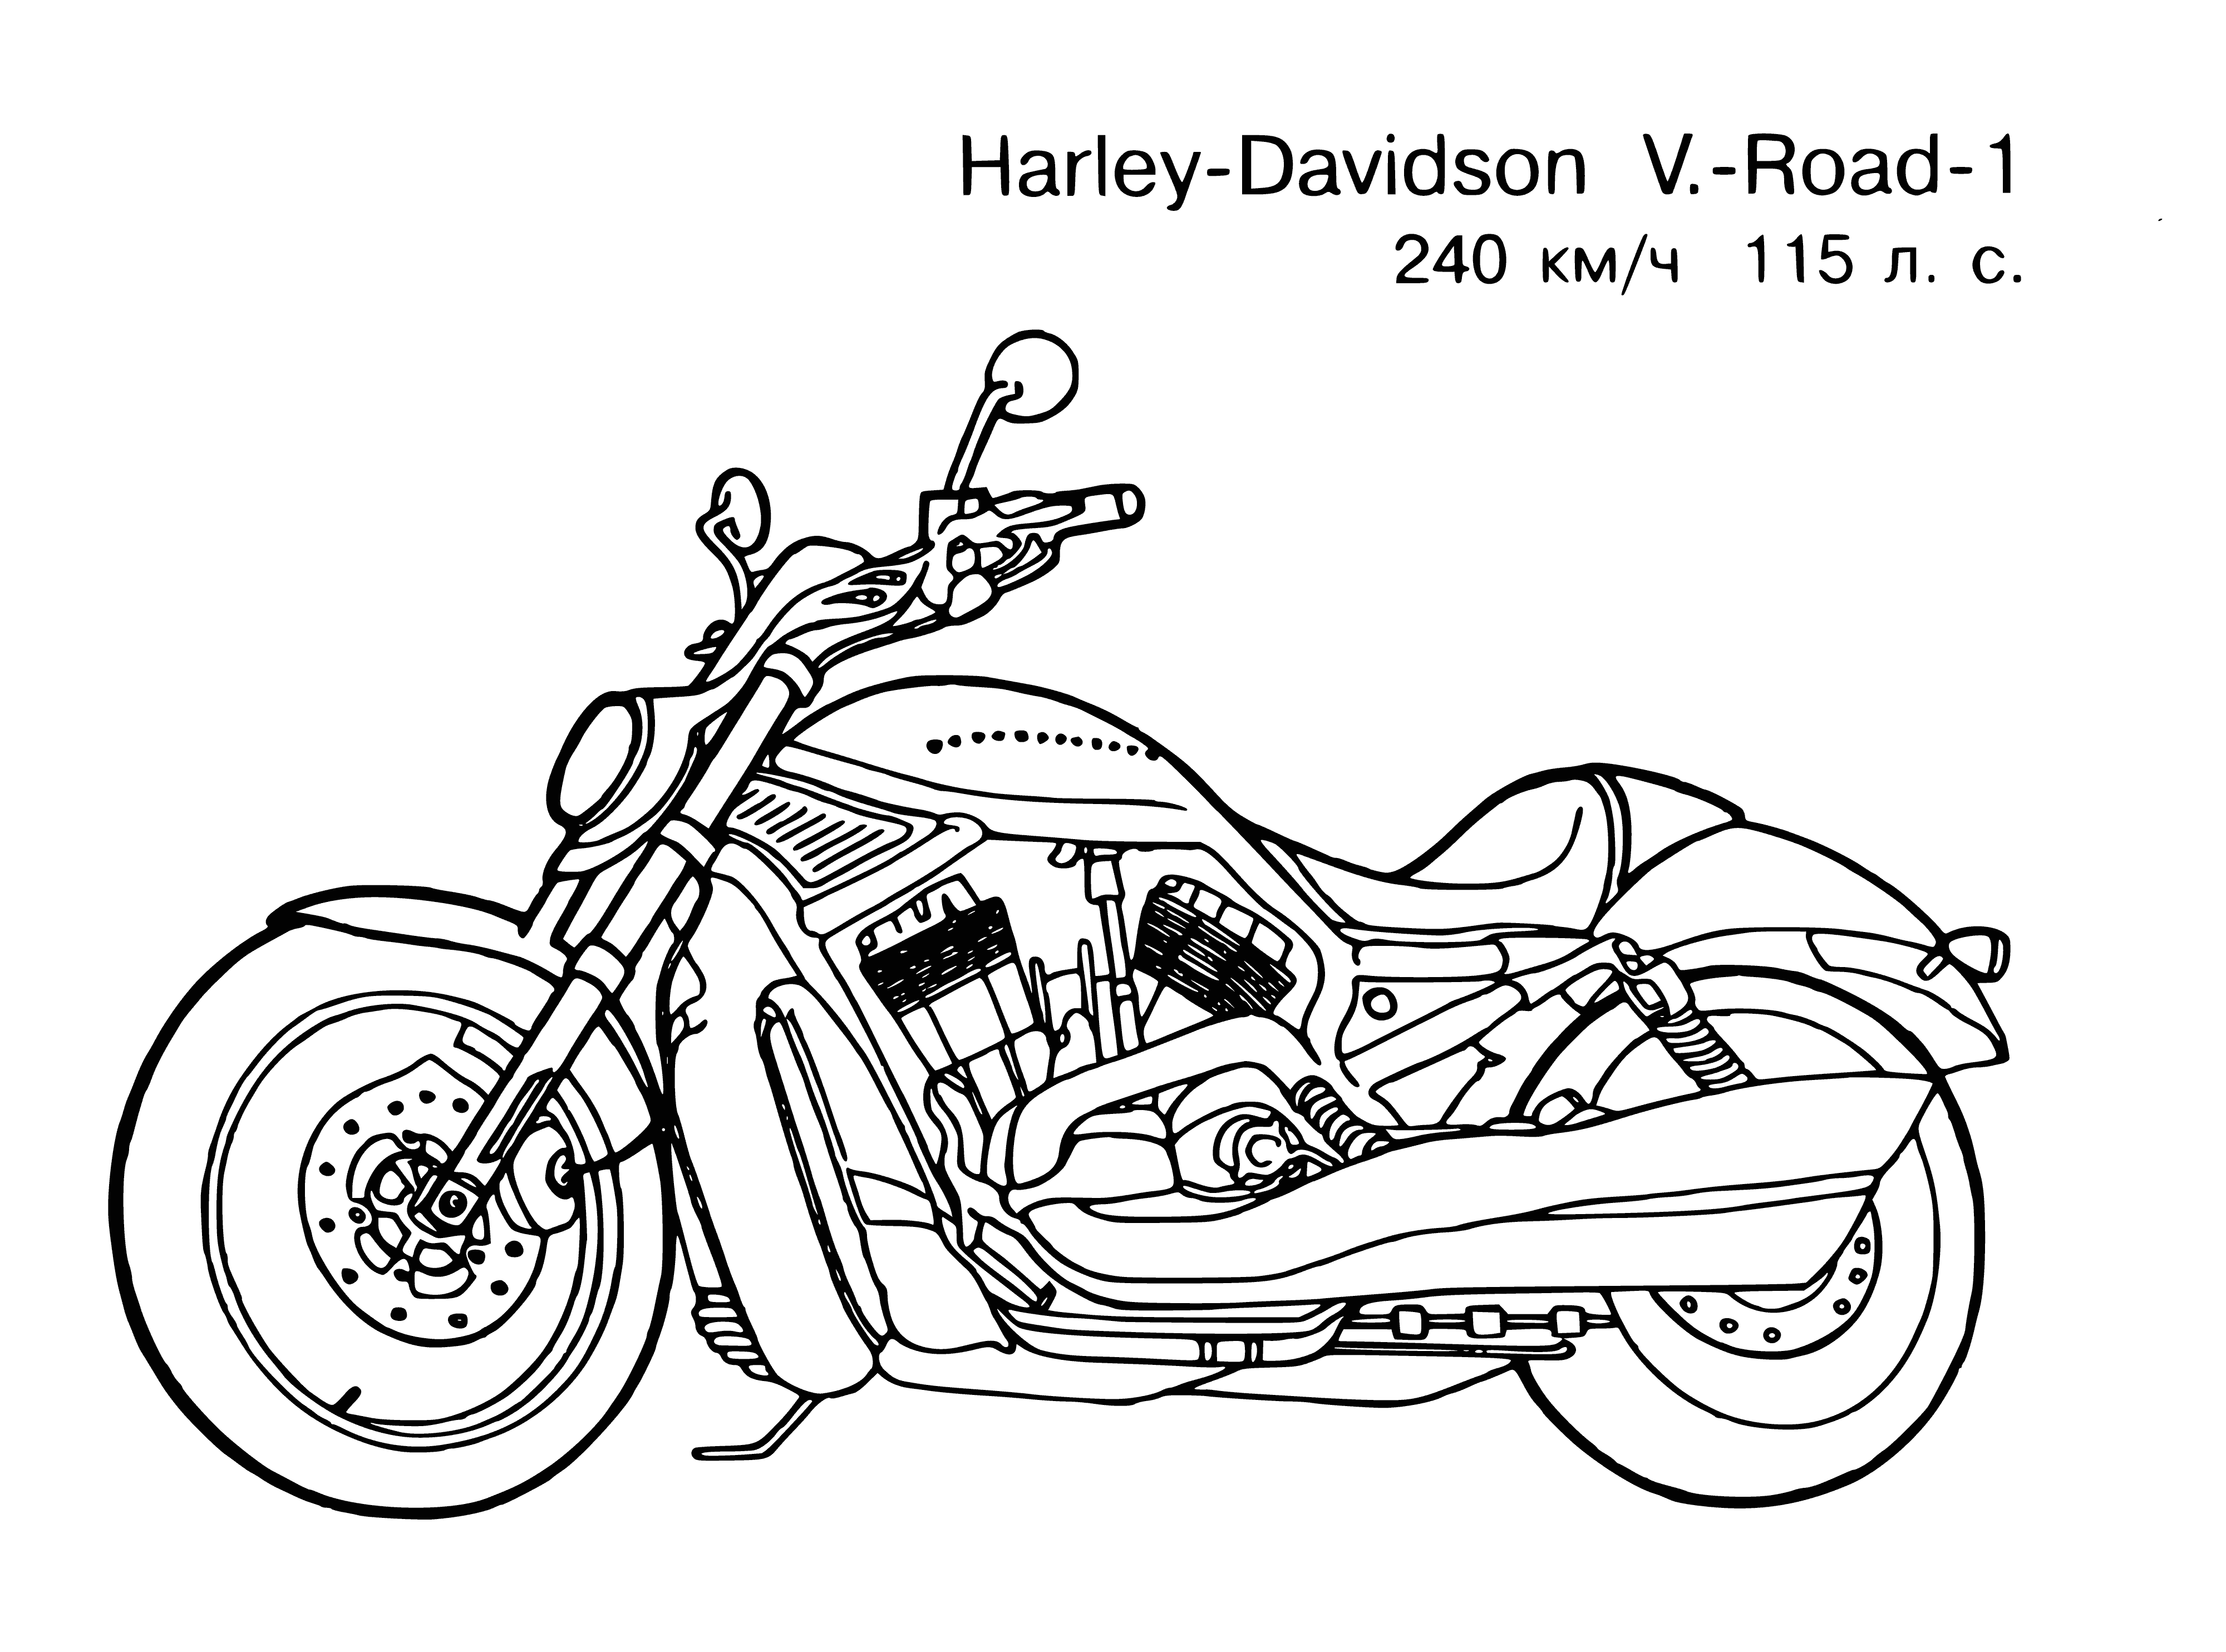 coloring page: 3 HD motorcycles, 2 parked - black + silver. Driving motorcycle also silver, all have HD logo. #HarleyDavidson